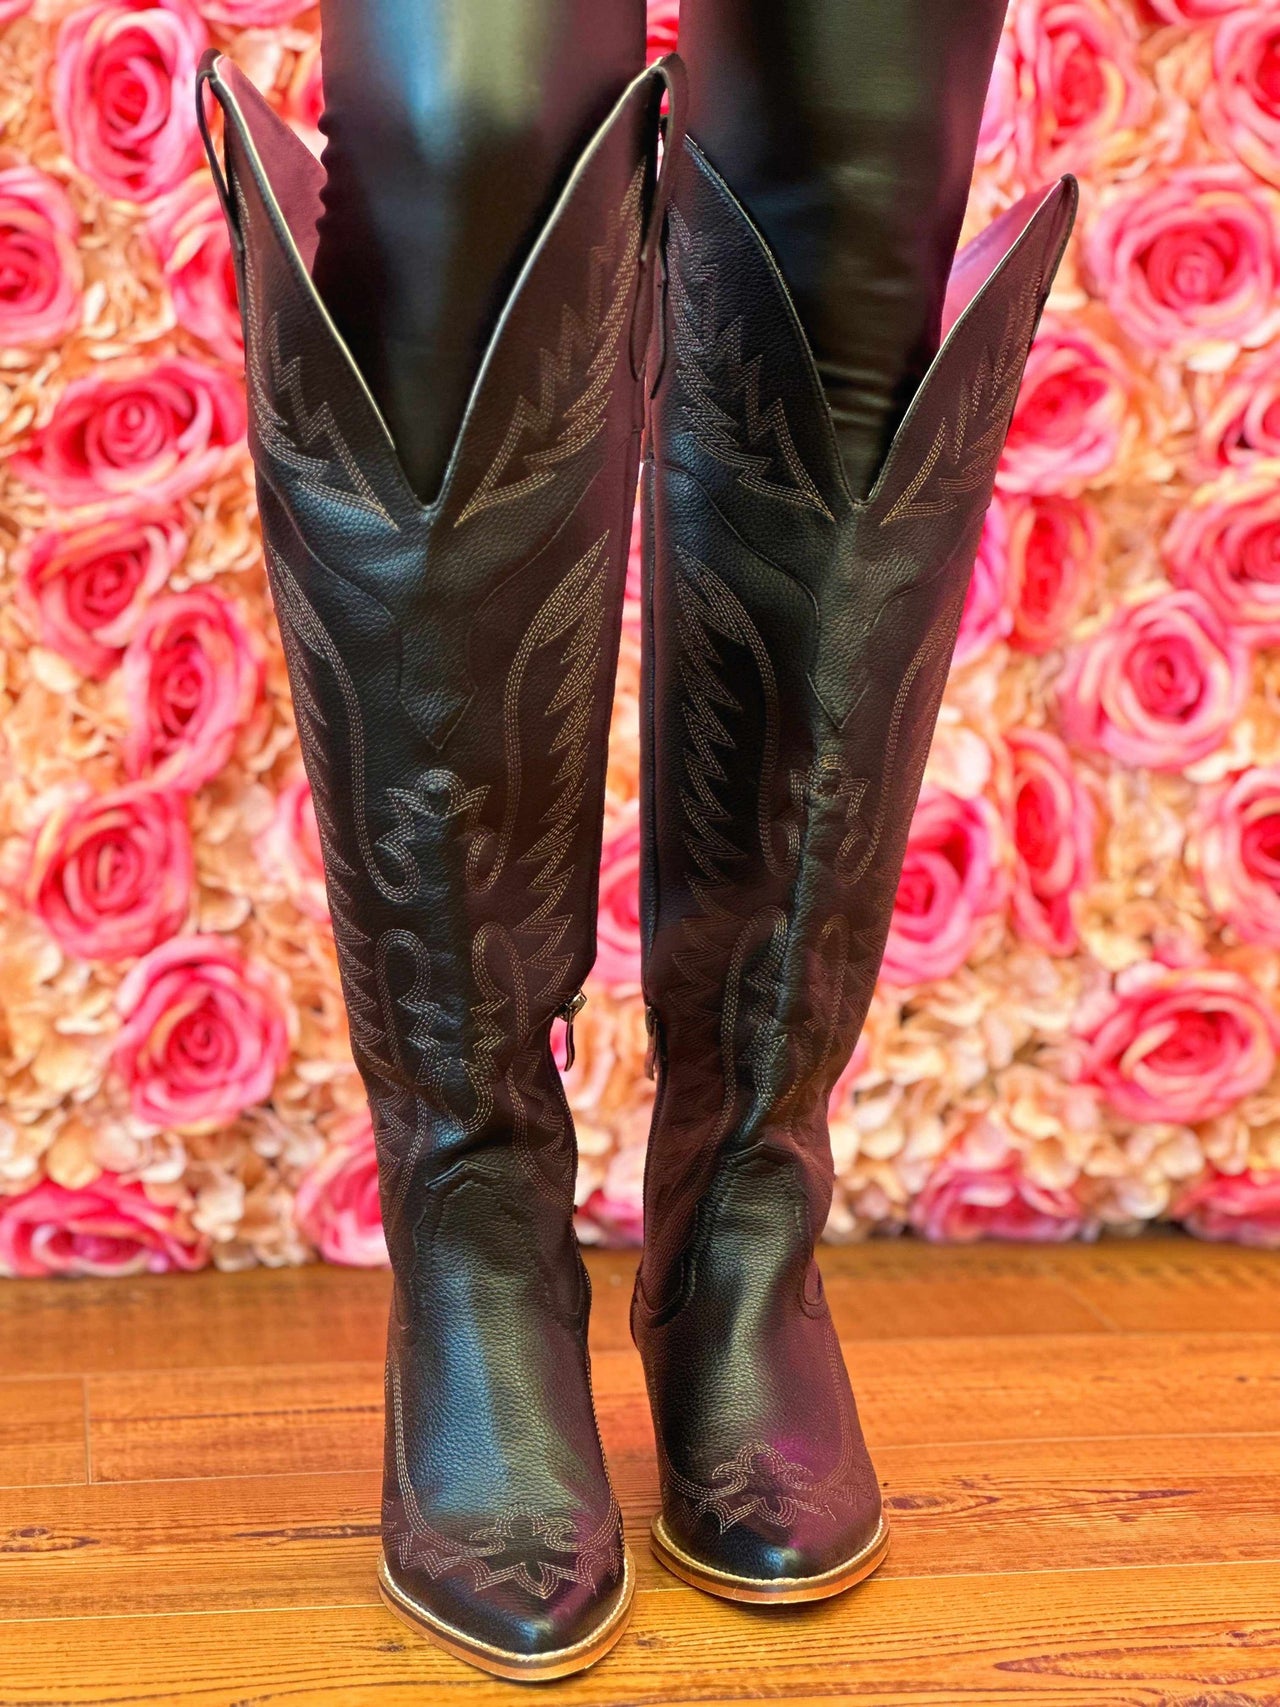 Black knee high cowgirl boots.